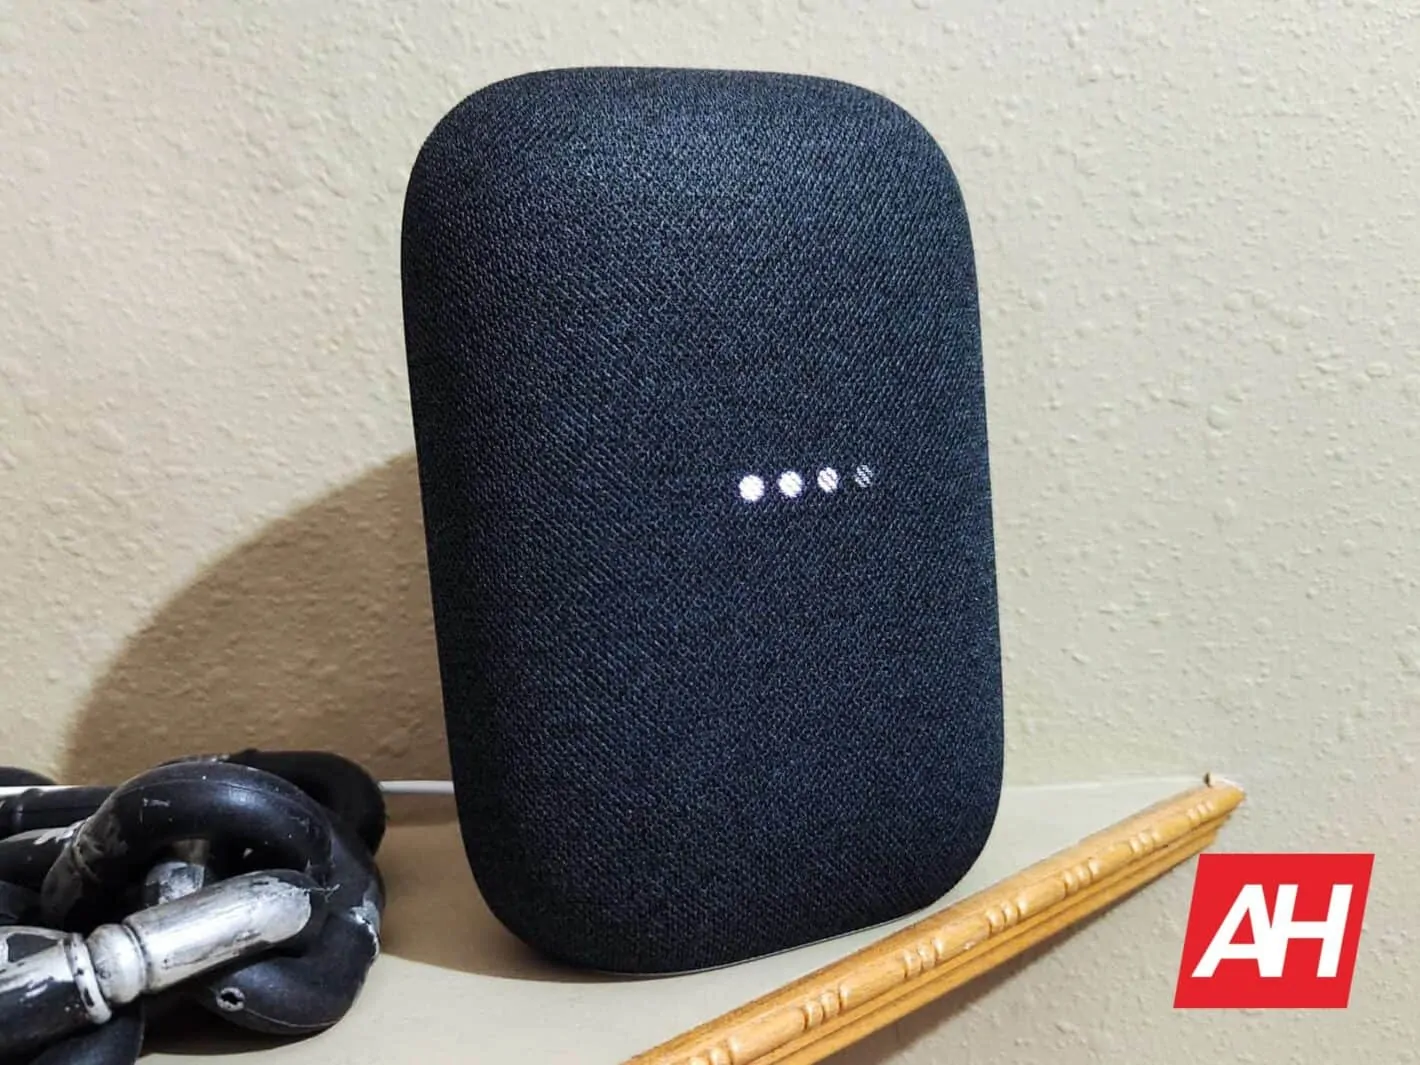 Featured image for How To Set Parental Controls, Filters For Google & Nest Smart Speakers